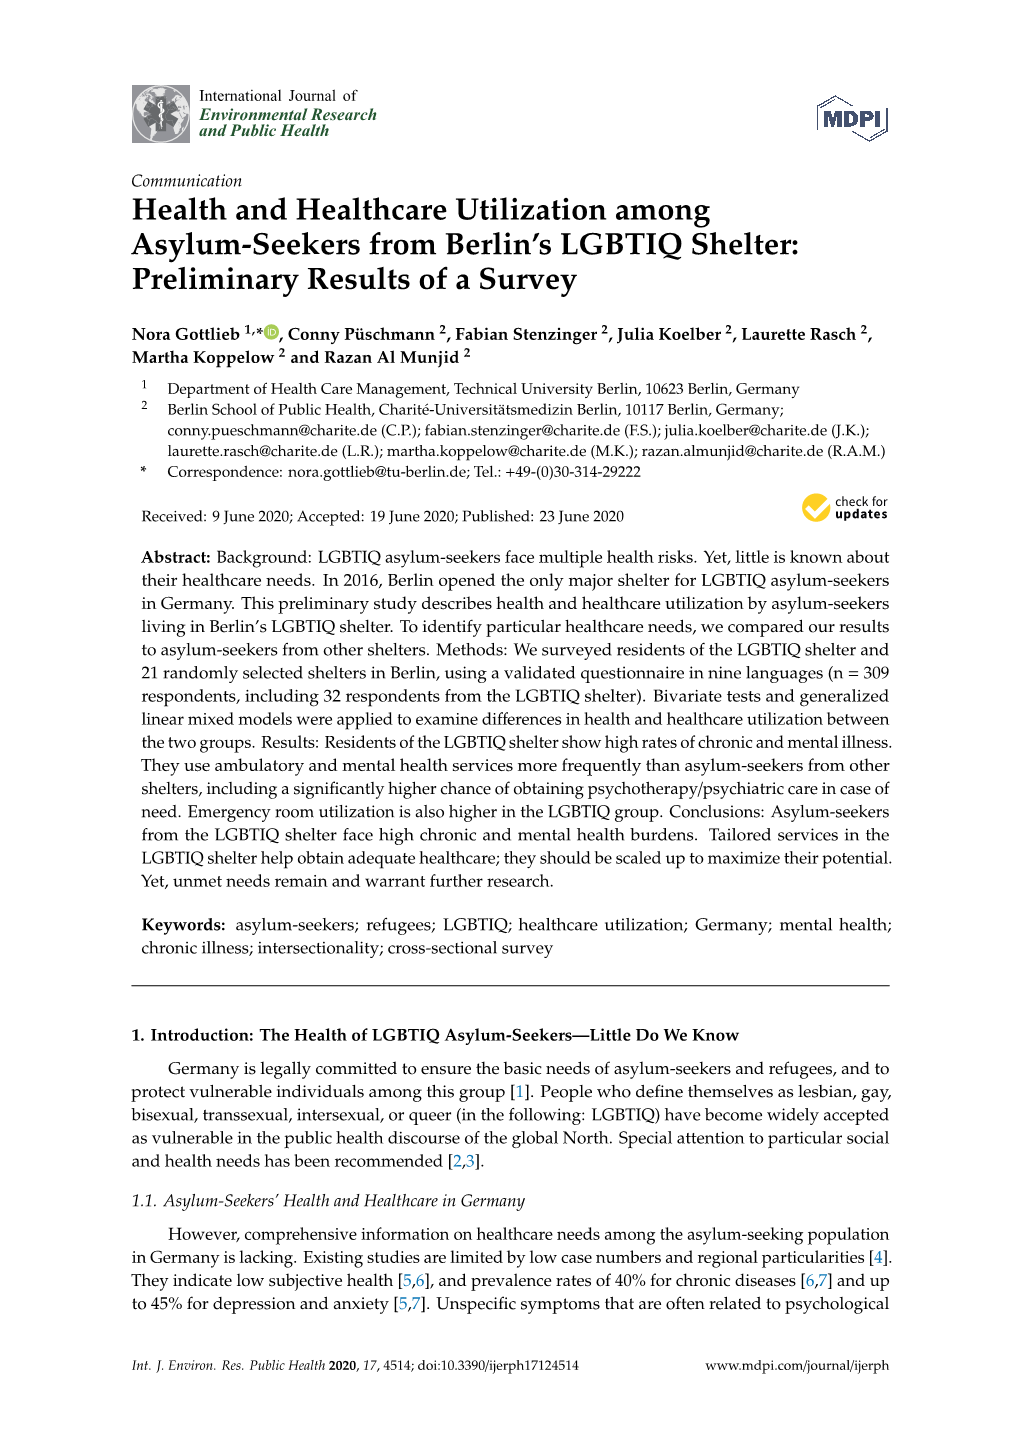 Health and Healthcare Utilization Among Asylum-Seekers from Berlin’S LGBTIQ Shelter: Preliminary Results of a Survey